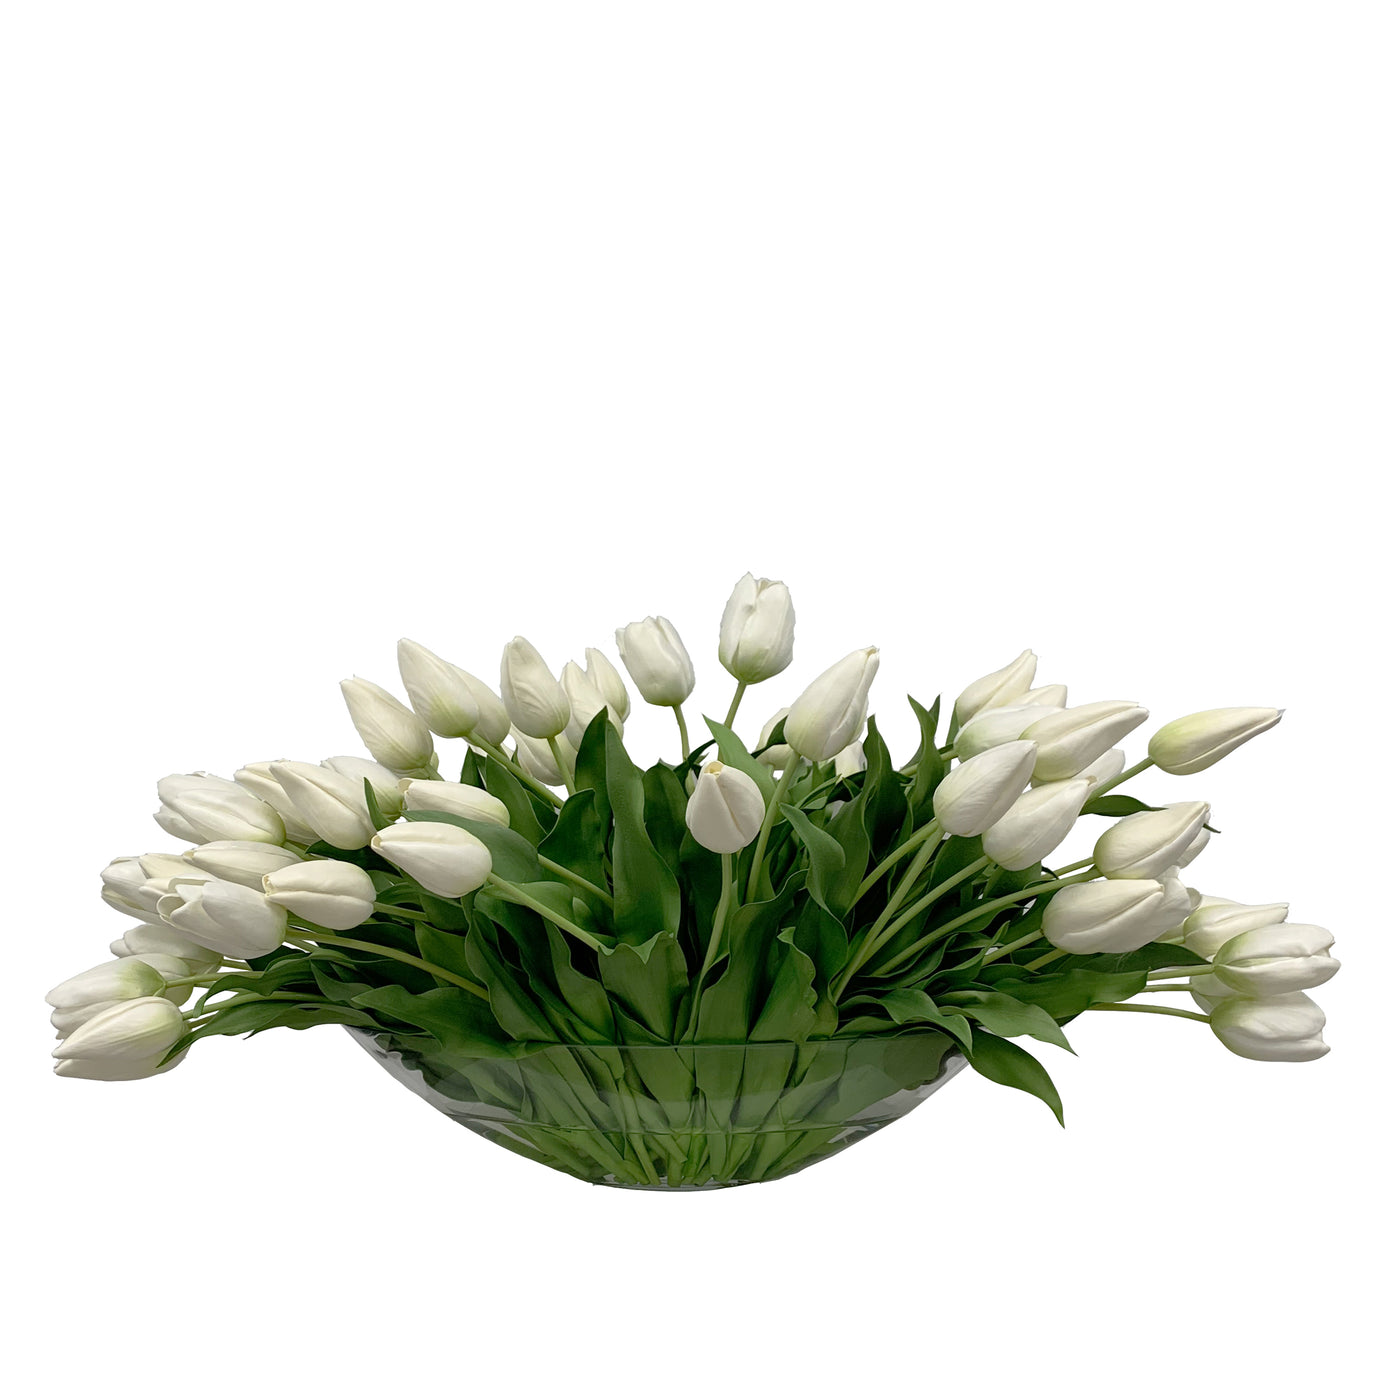 MIX TULIP IN OVAL GLASS 19"